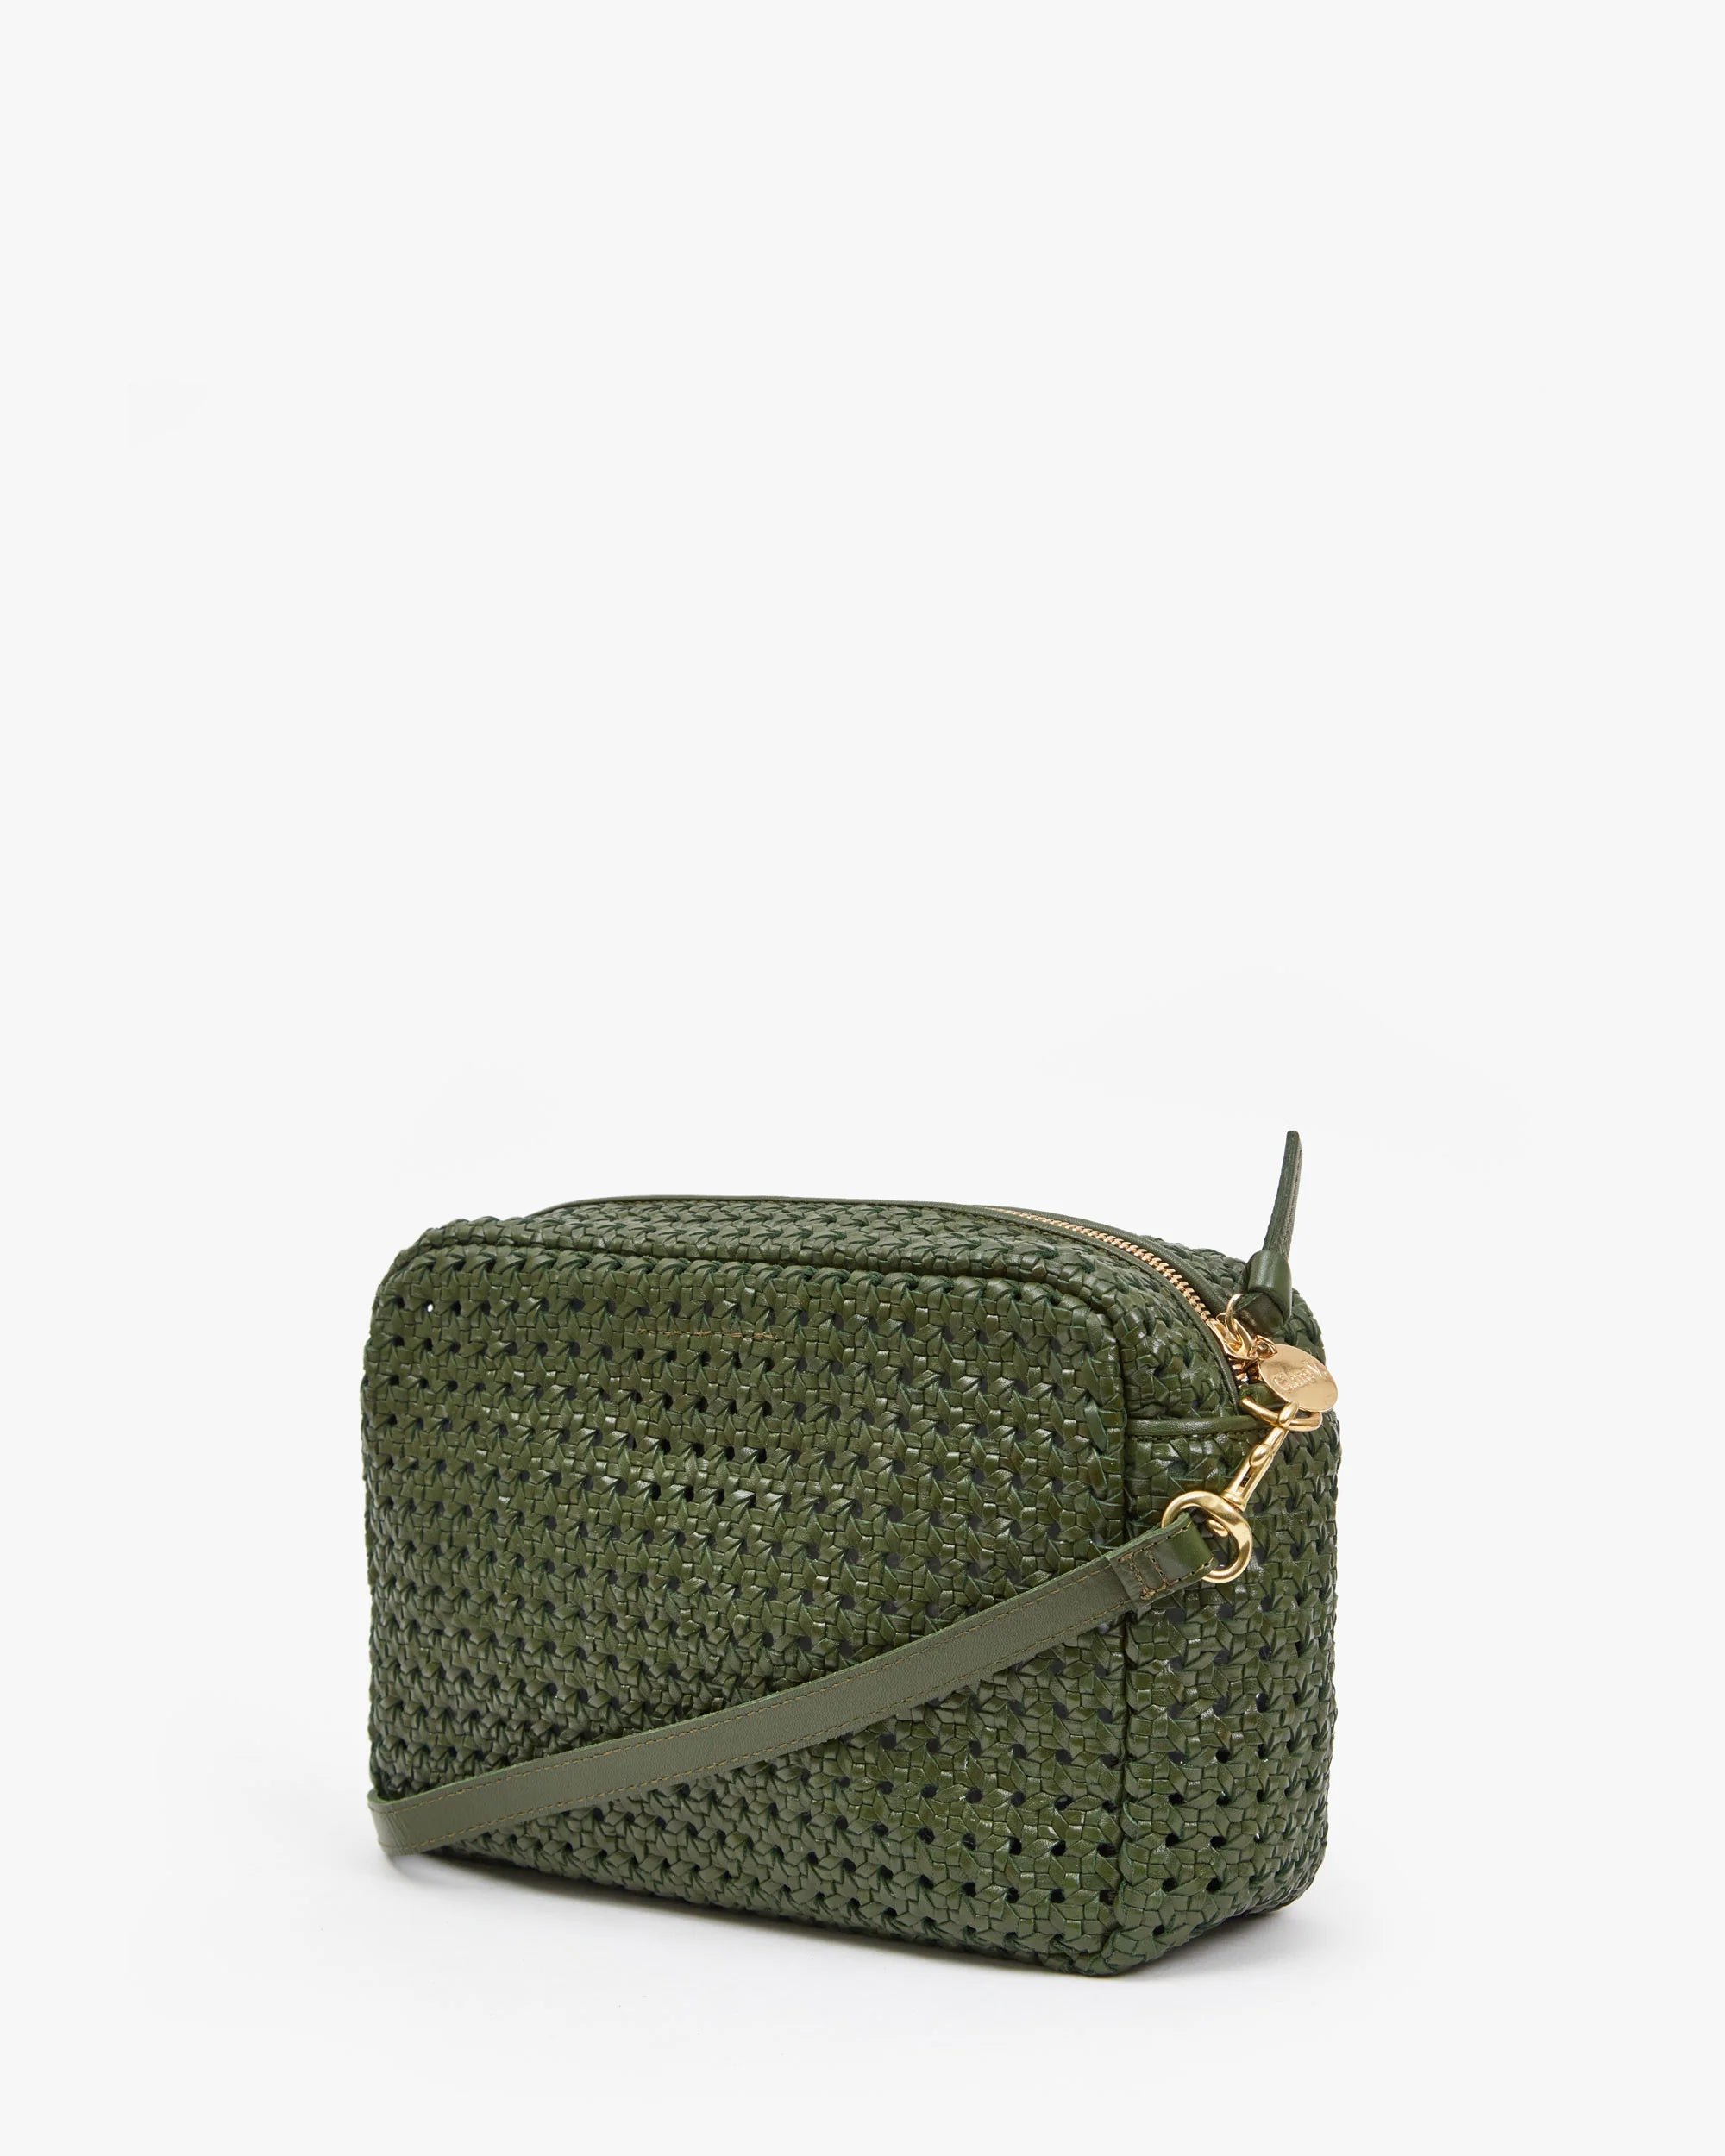 Clare V Marisol Woven Leather Crossbody Bag In Brown